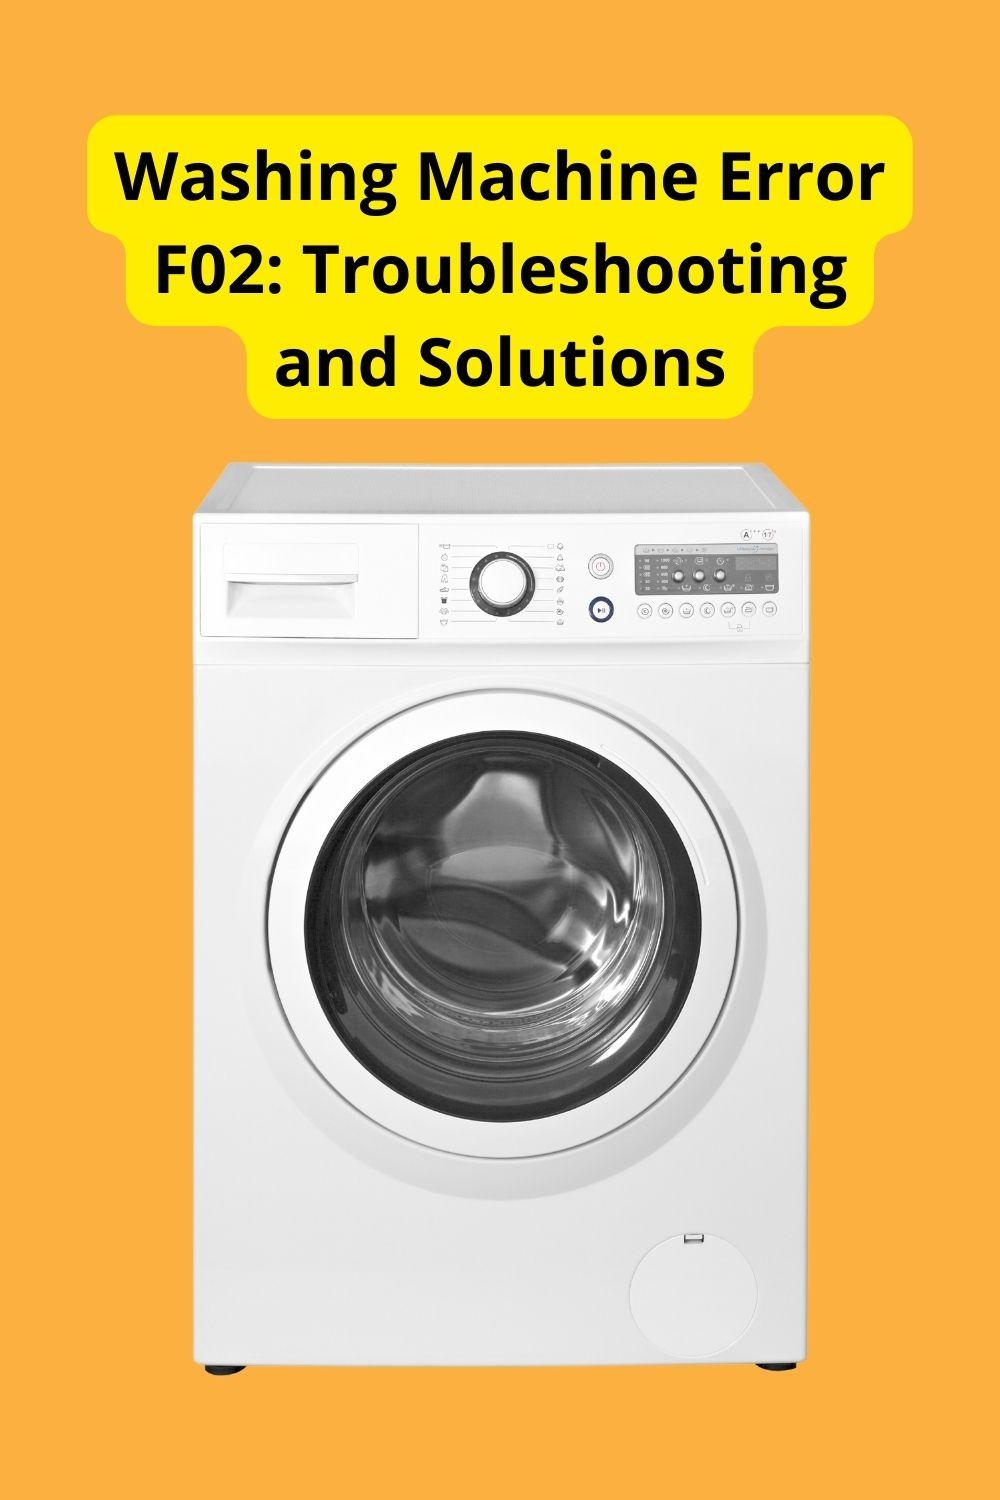 Washing Machine Error F02: Troubleshooting and Solutions